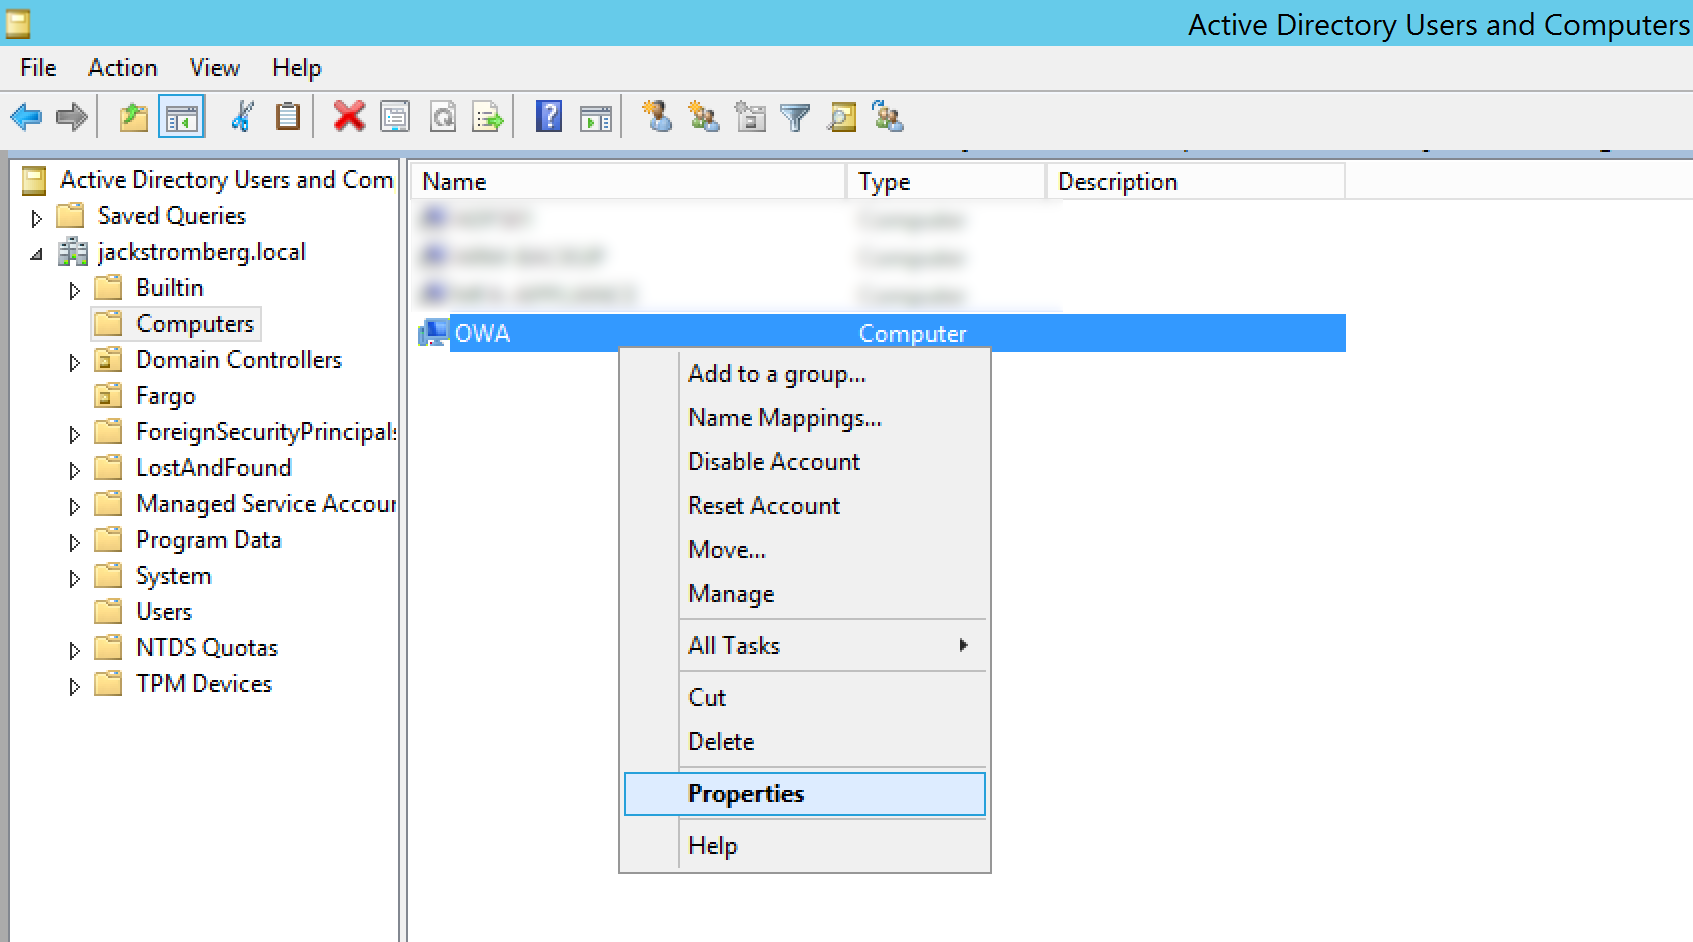 Active Directory Users and Computers - Computers - OWA - Properties